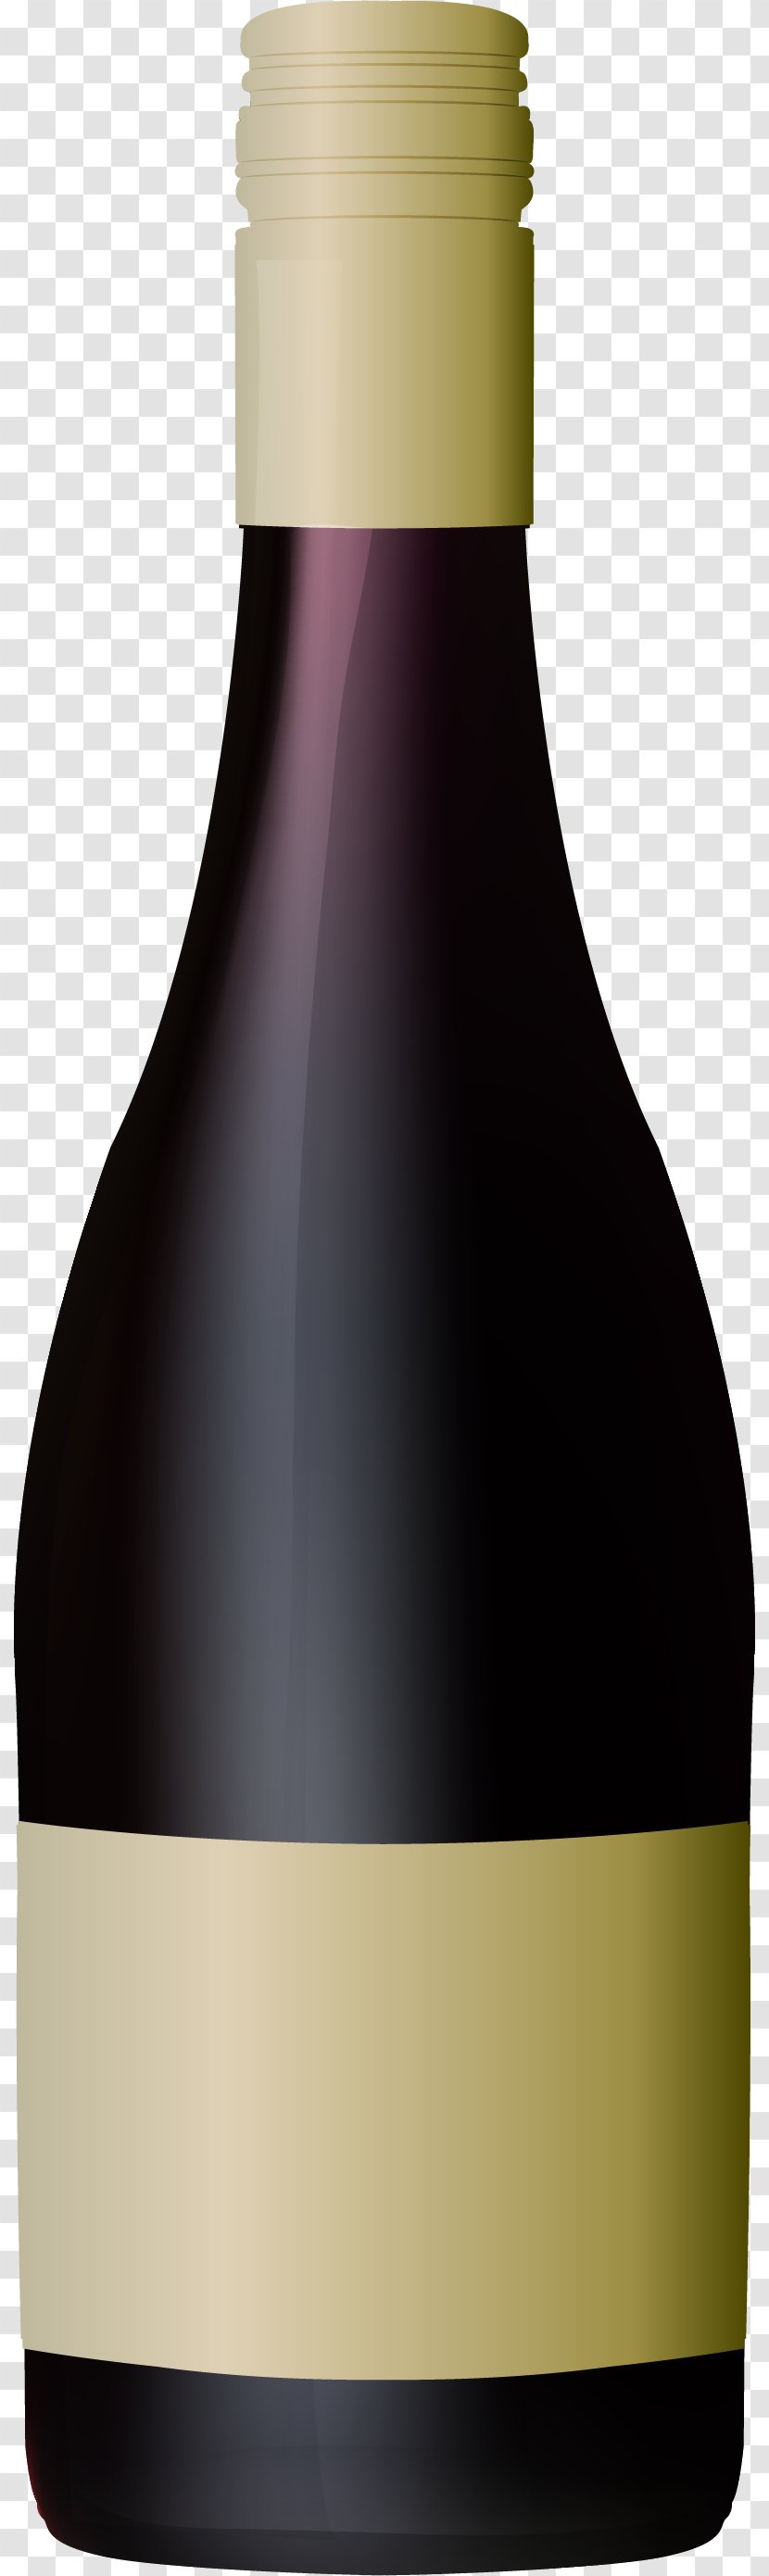 Red Wine Bottle Glass - Silhouette - Purple Material Transparent PNG